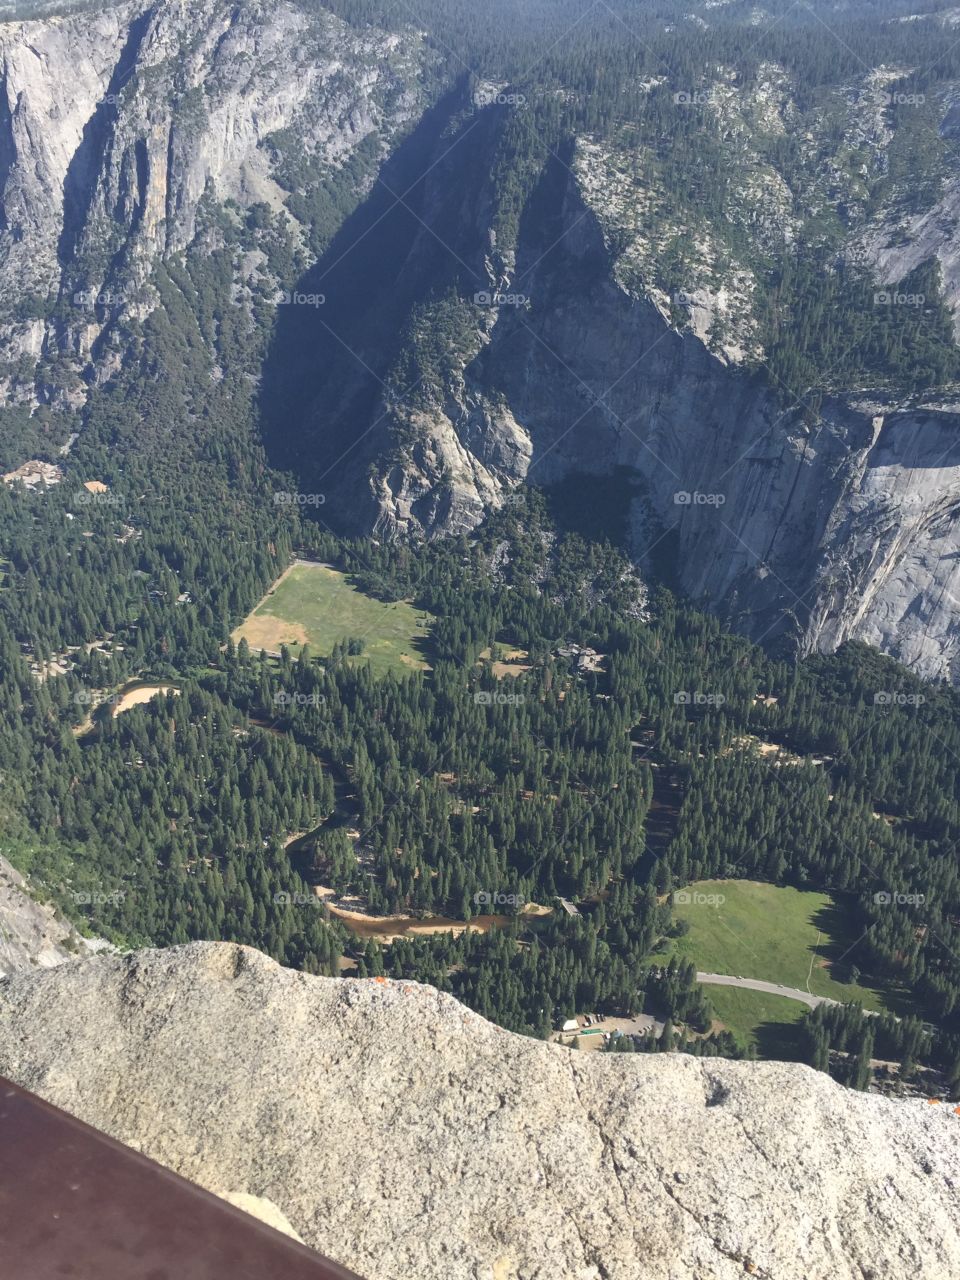 View from above. Taken from glacier point of Yosemite Valley